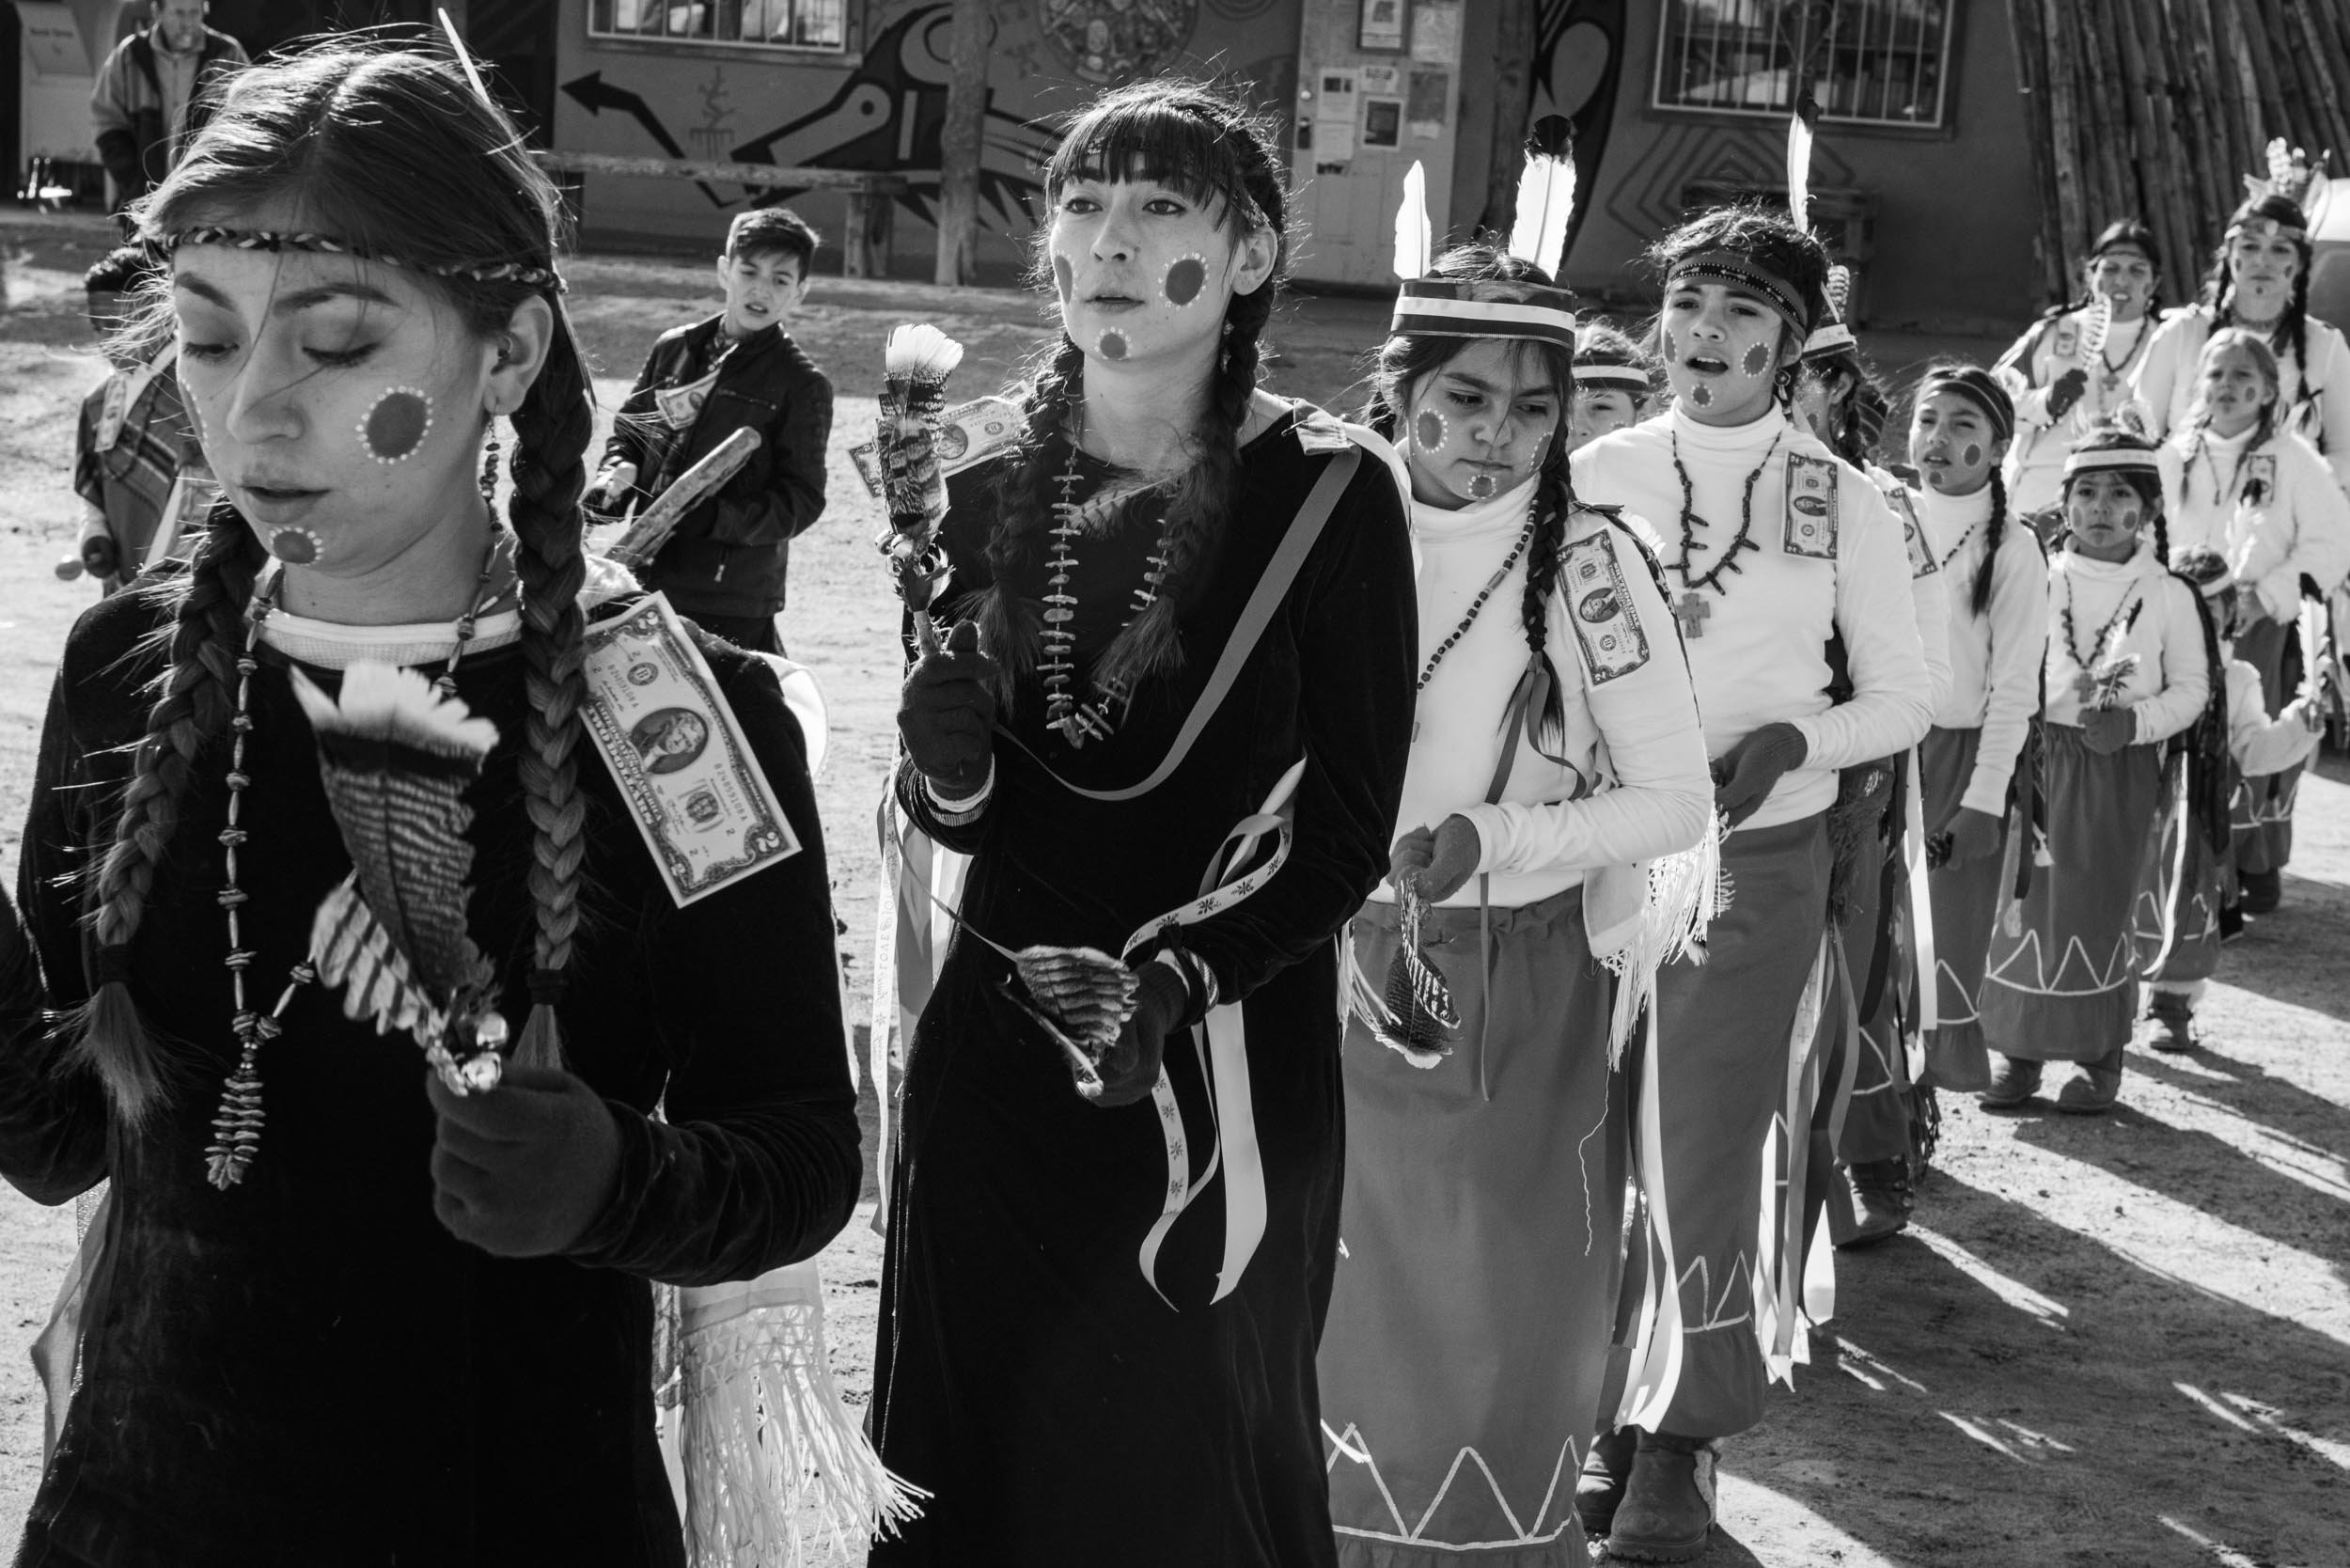  Abiquiú’s Santo Tomás feast day ceremony culminates on Sunday with El Cautivo (The Captive) Dance, which has been performed at the pueblo for more than 150 years. Dancers dress as their ancestors, with face paint, feather hair ornaments, and ankle b